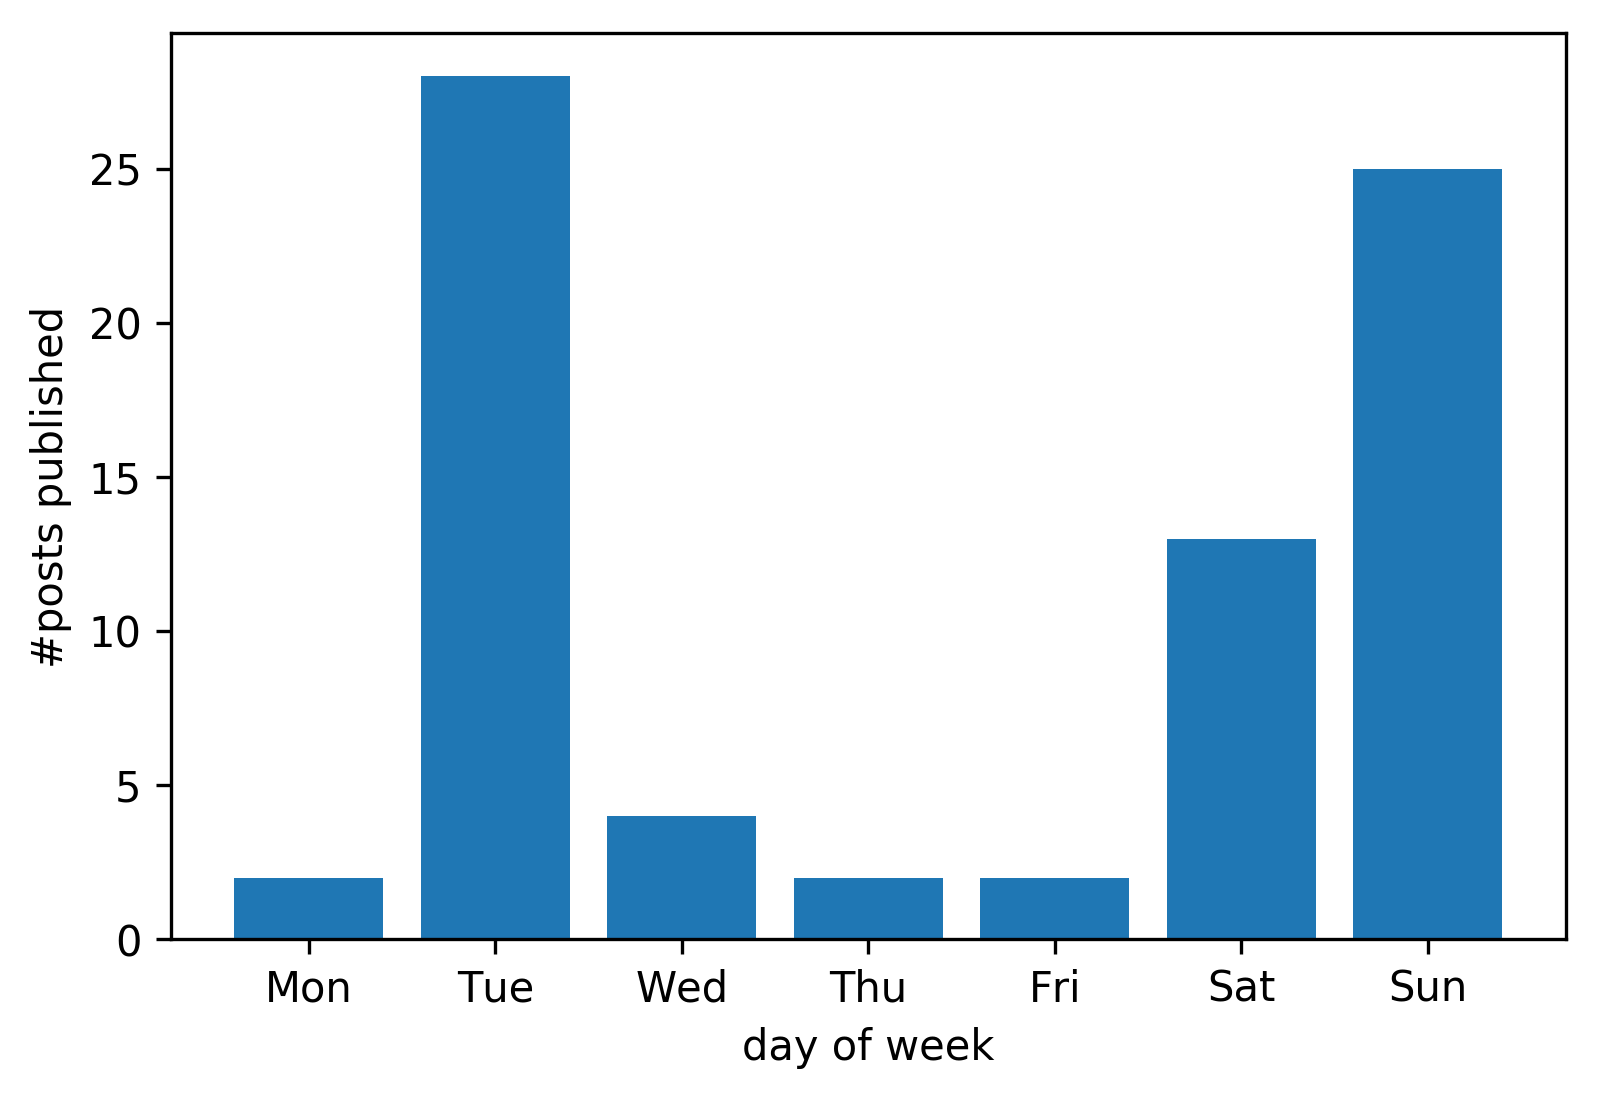 Bar plot of #posts published per day of week